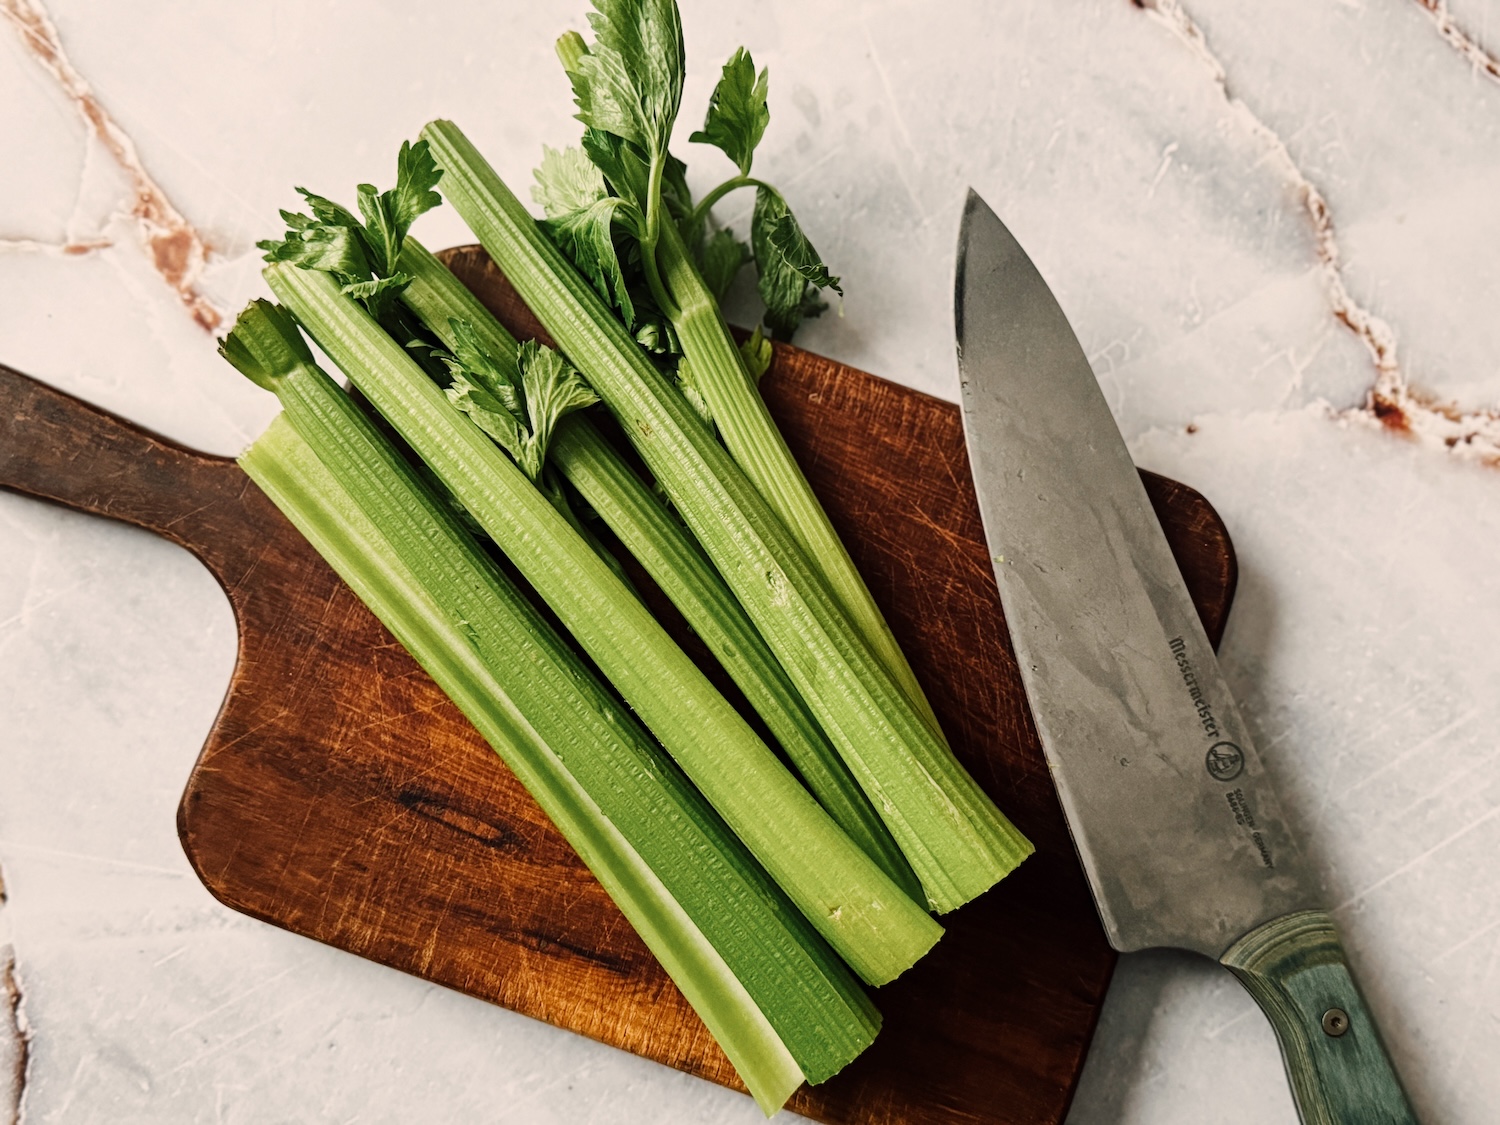 Celery stalks laid out on a wooden cutting board with a knife next to them. 